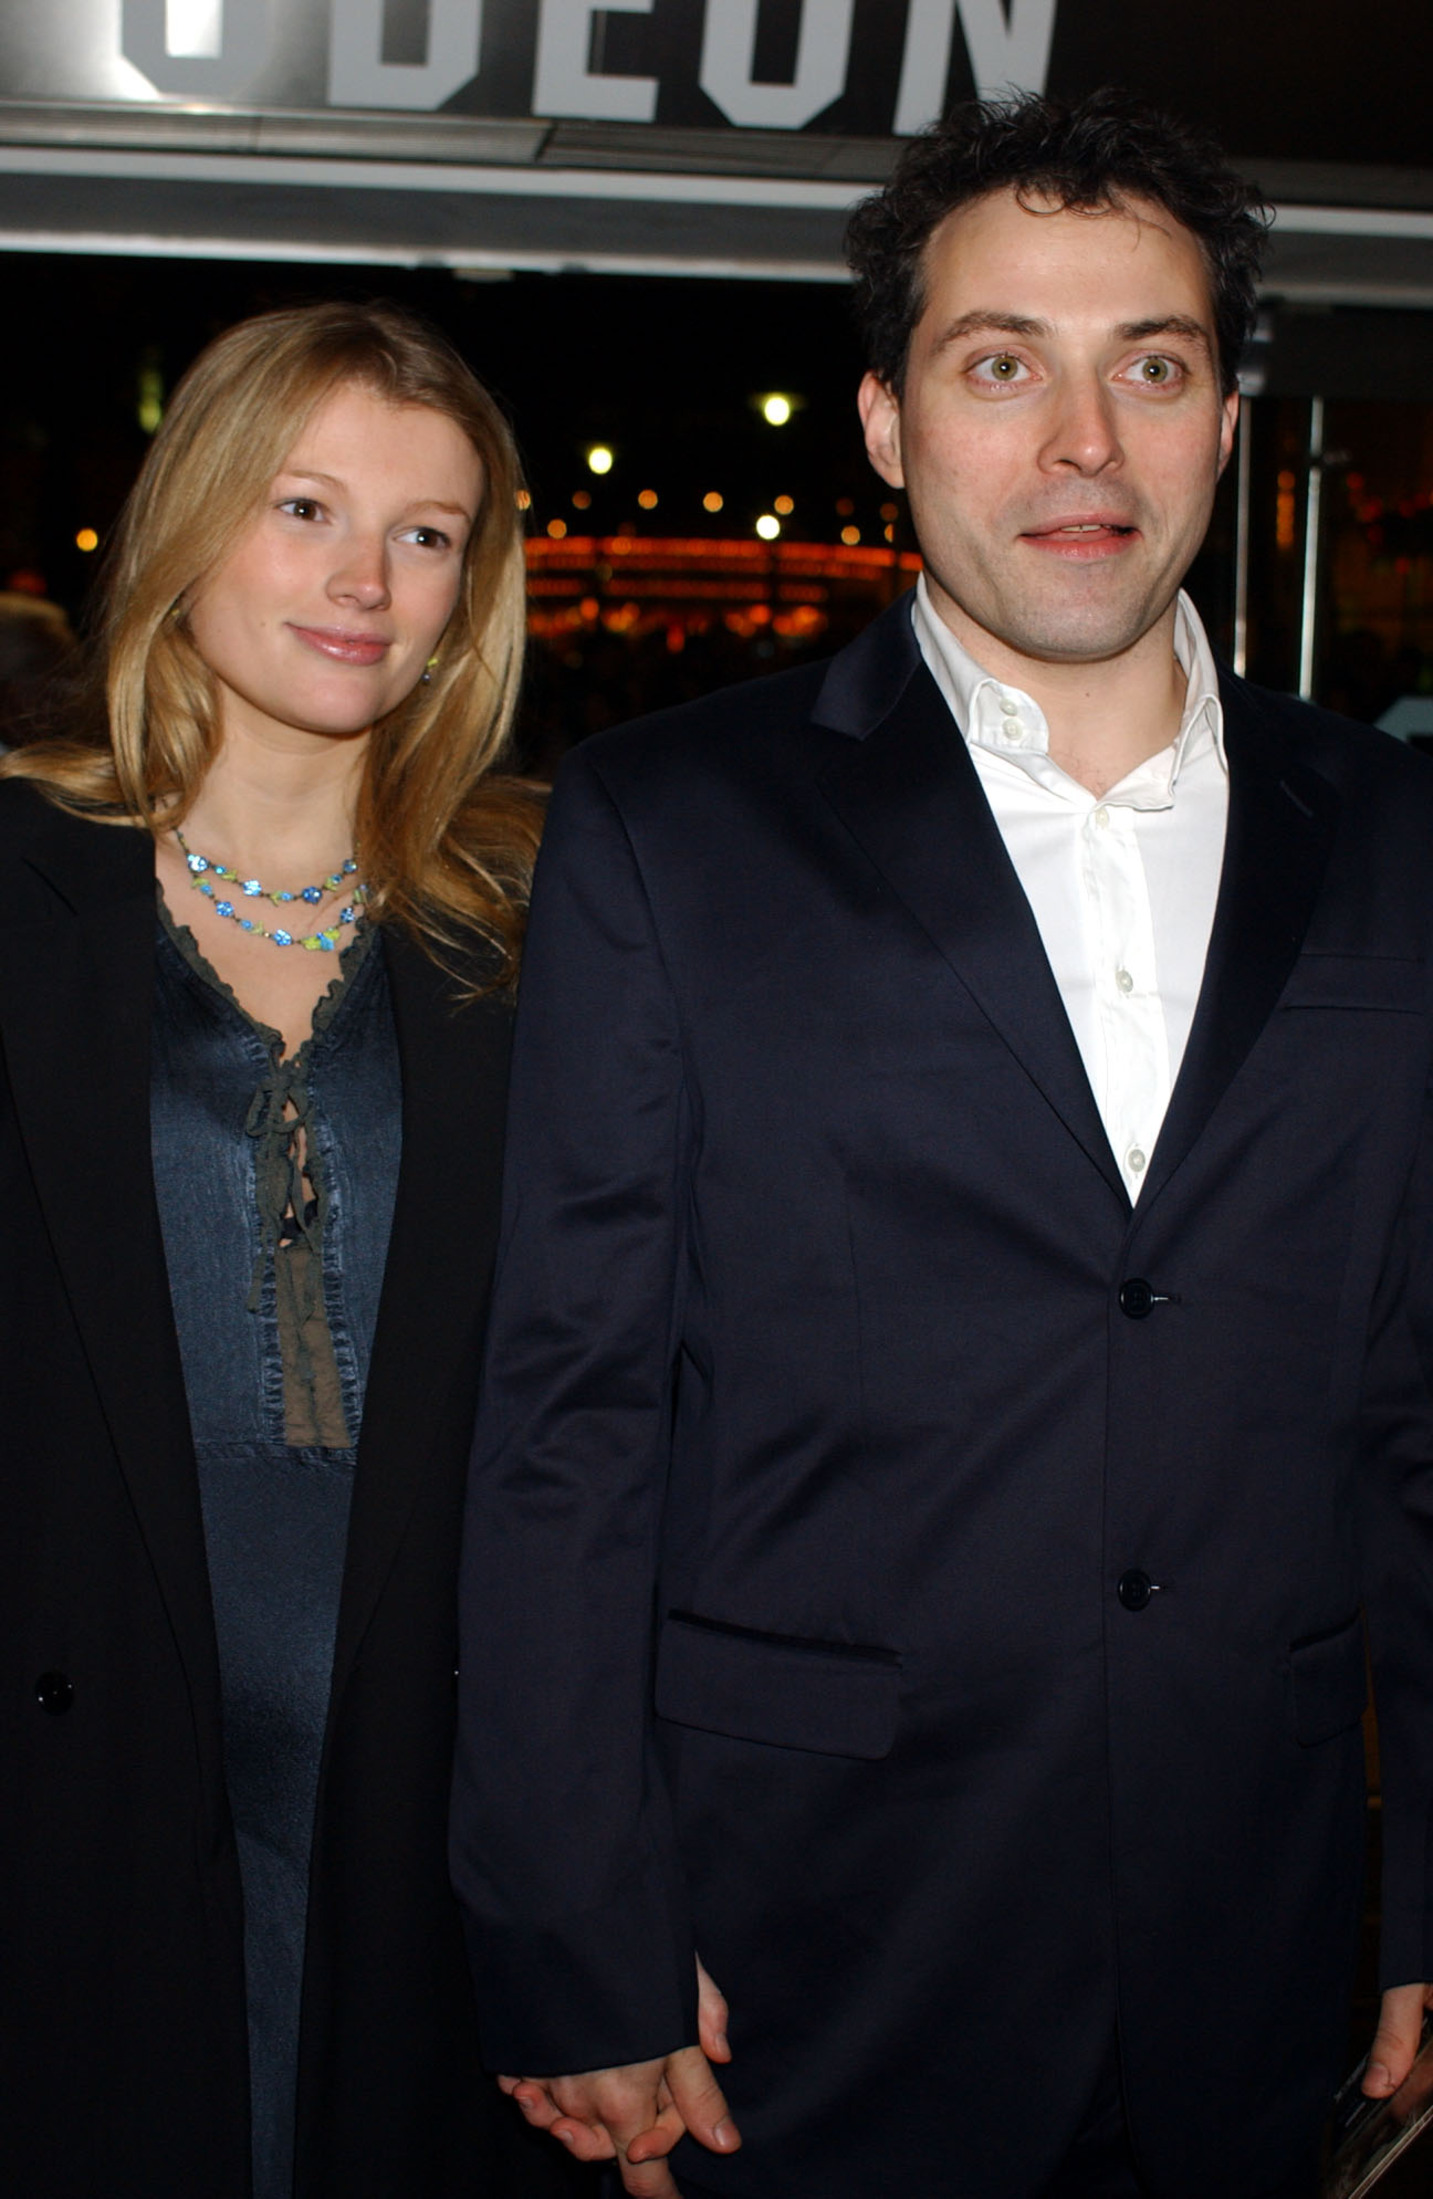 Amy Gardner and Rufus Sewell at the world premiere of "Lord of the Rings: The Fellowship of the Ring" on December 10, 2001, in London | Source: Getty Images